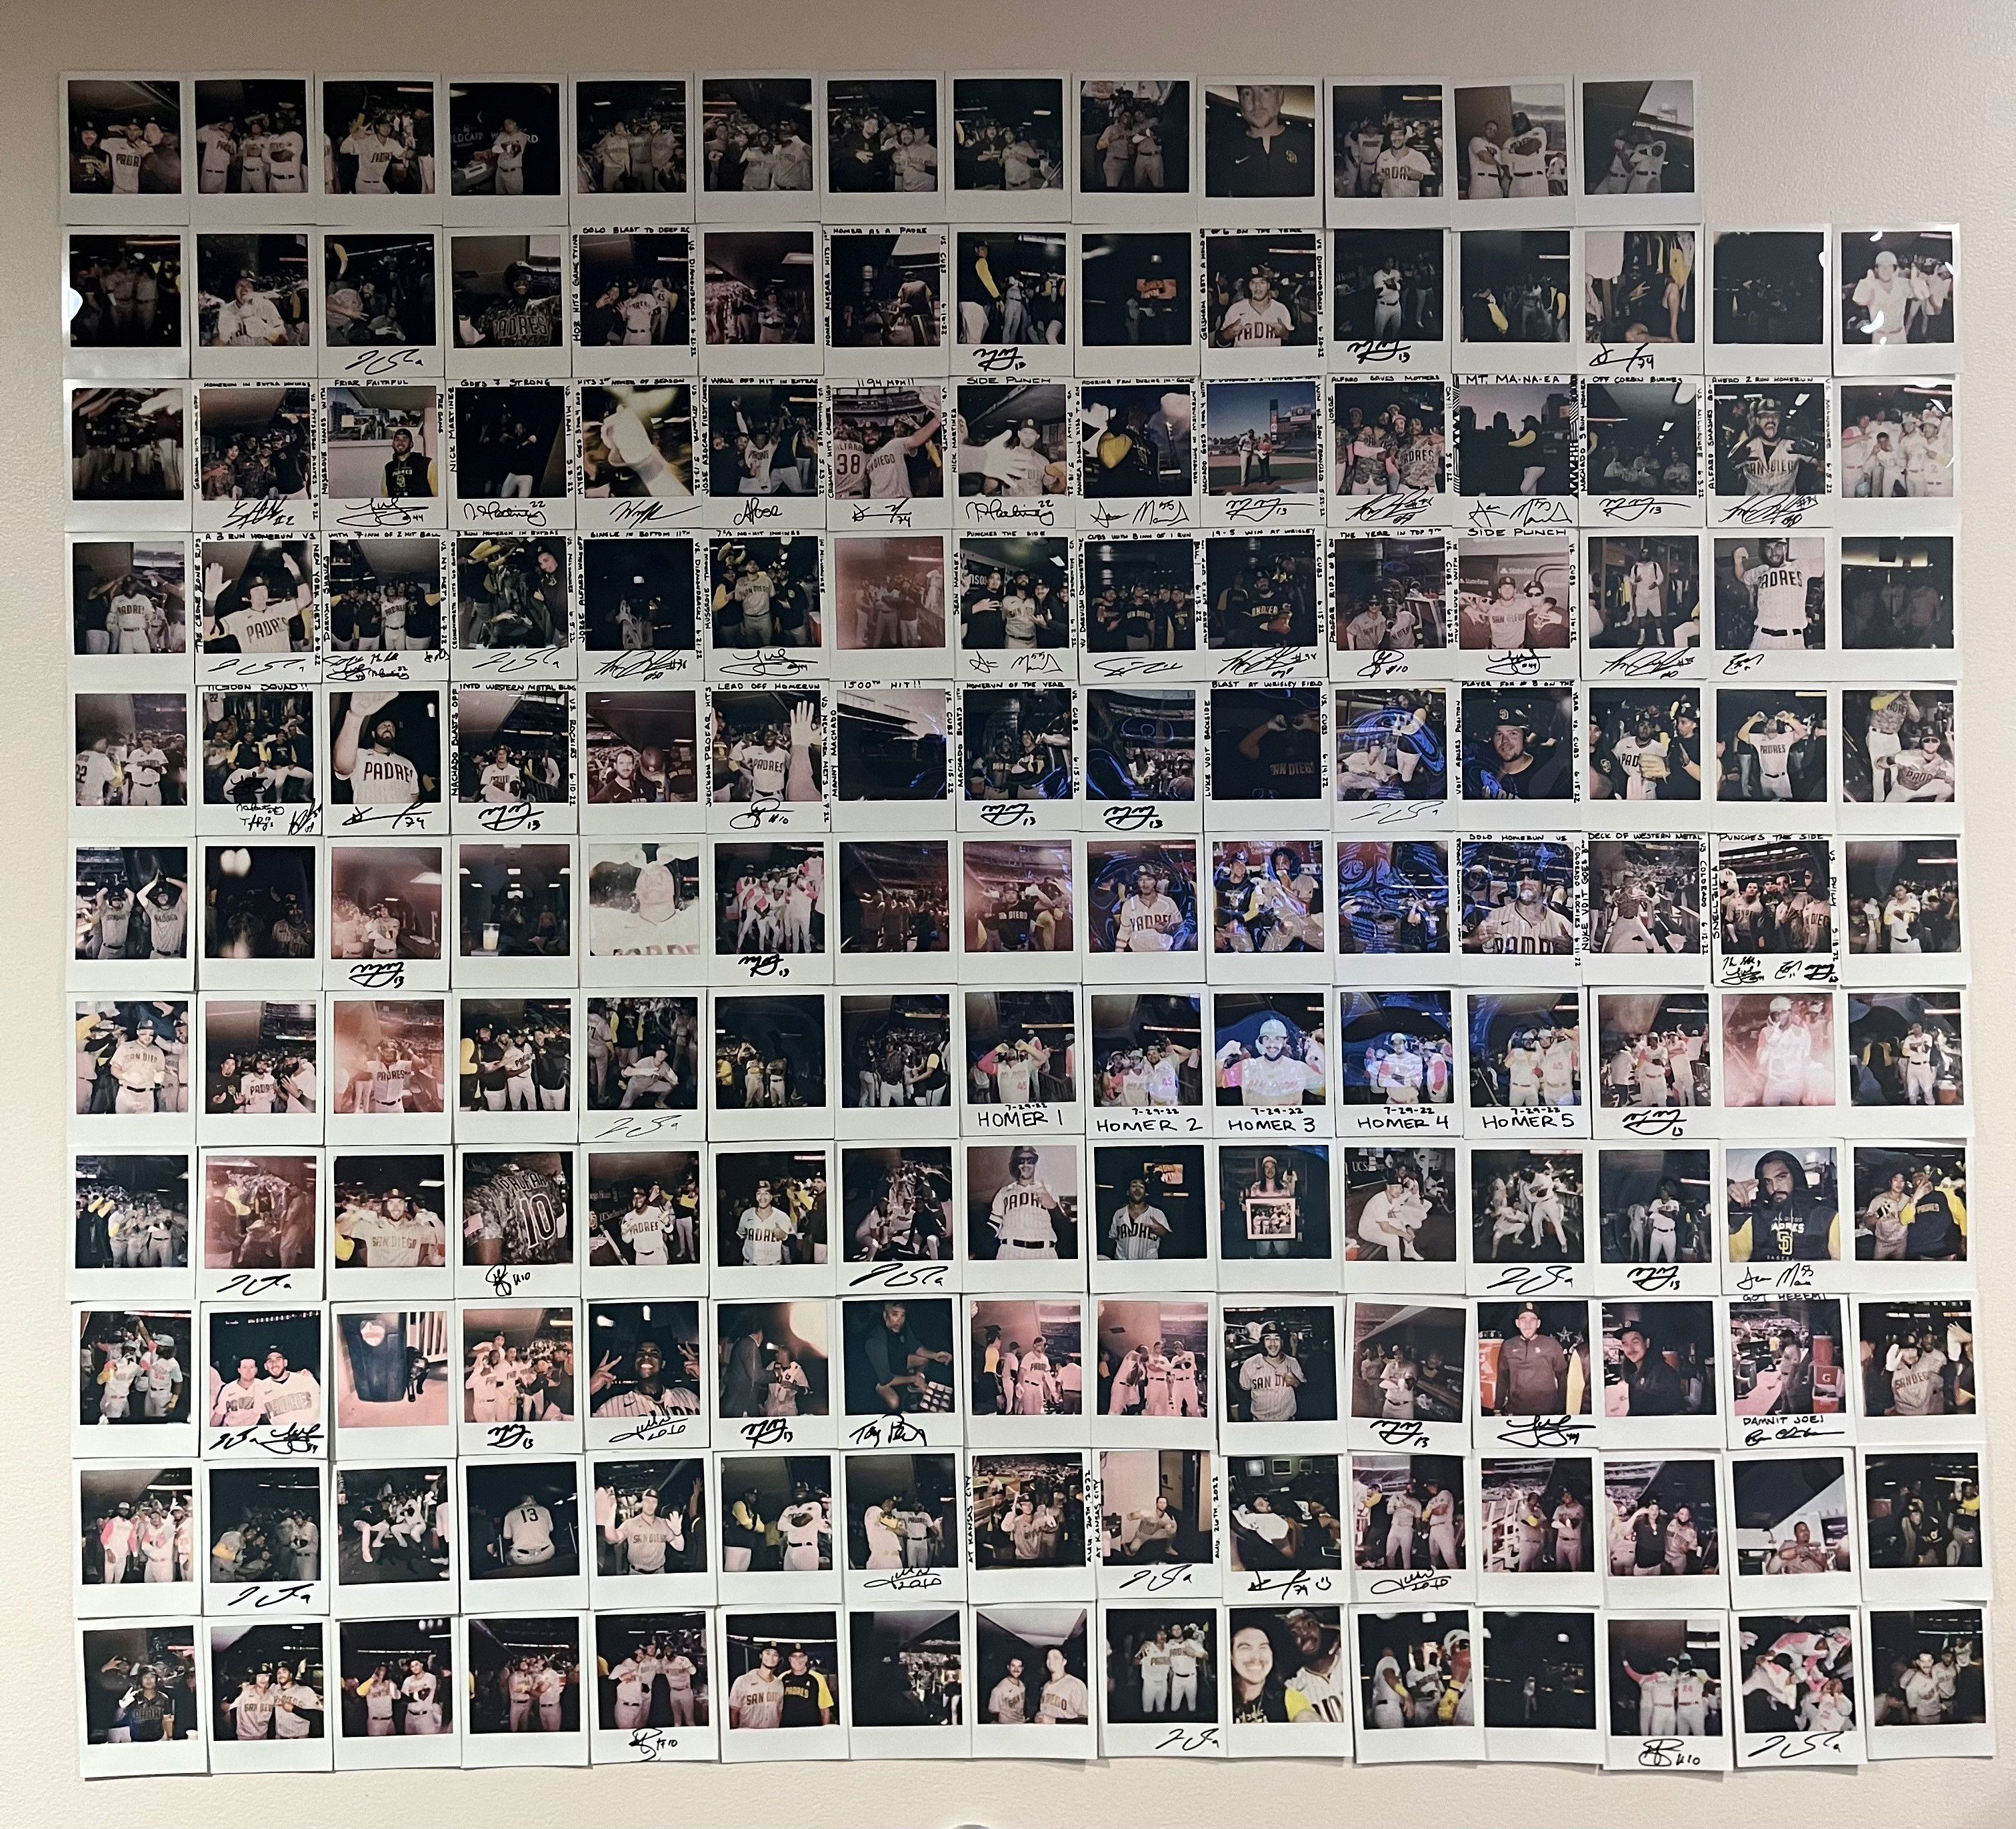 <div>Snapshots and moon shots: Padres' Polaroid tradition continues in NLCS</div>